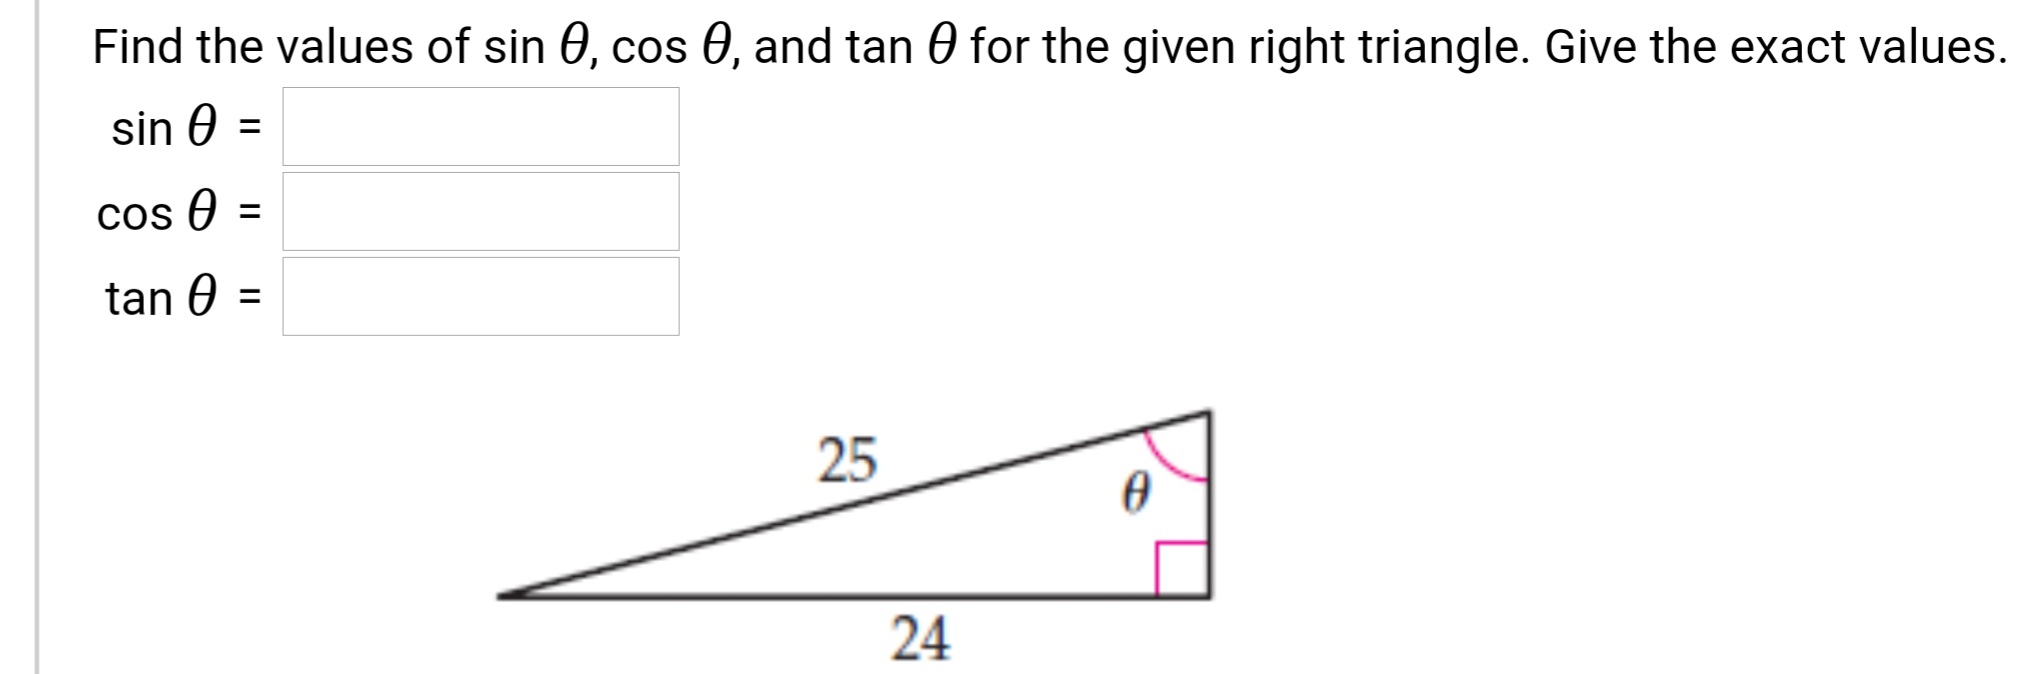 Find the values of sin 0, cos 0, and tan 0 for the given right triangle. Give the exact values.
sin 0 =
%3D
cos O
tan 0
%3D
25
24
